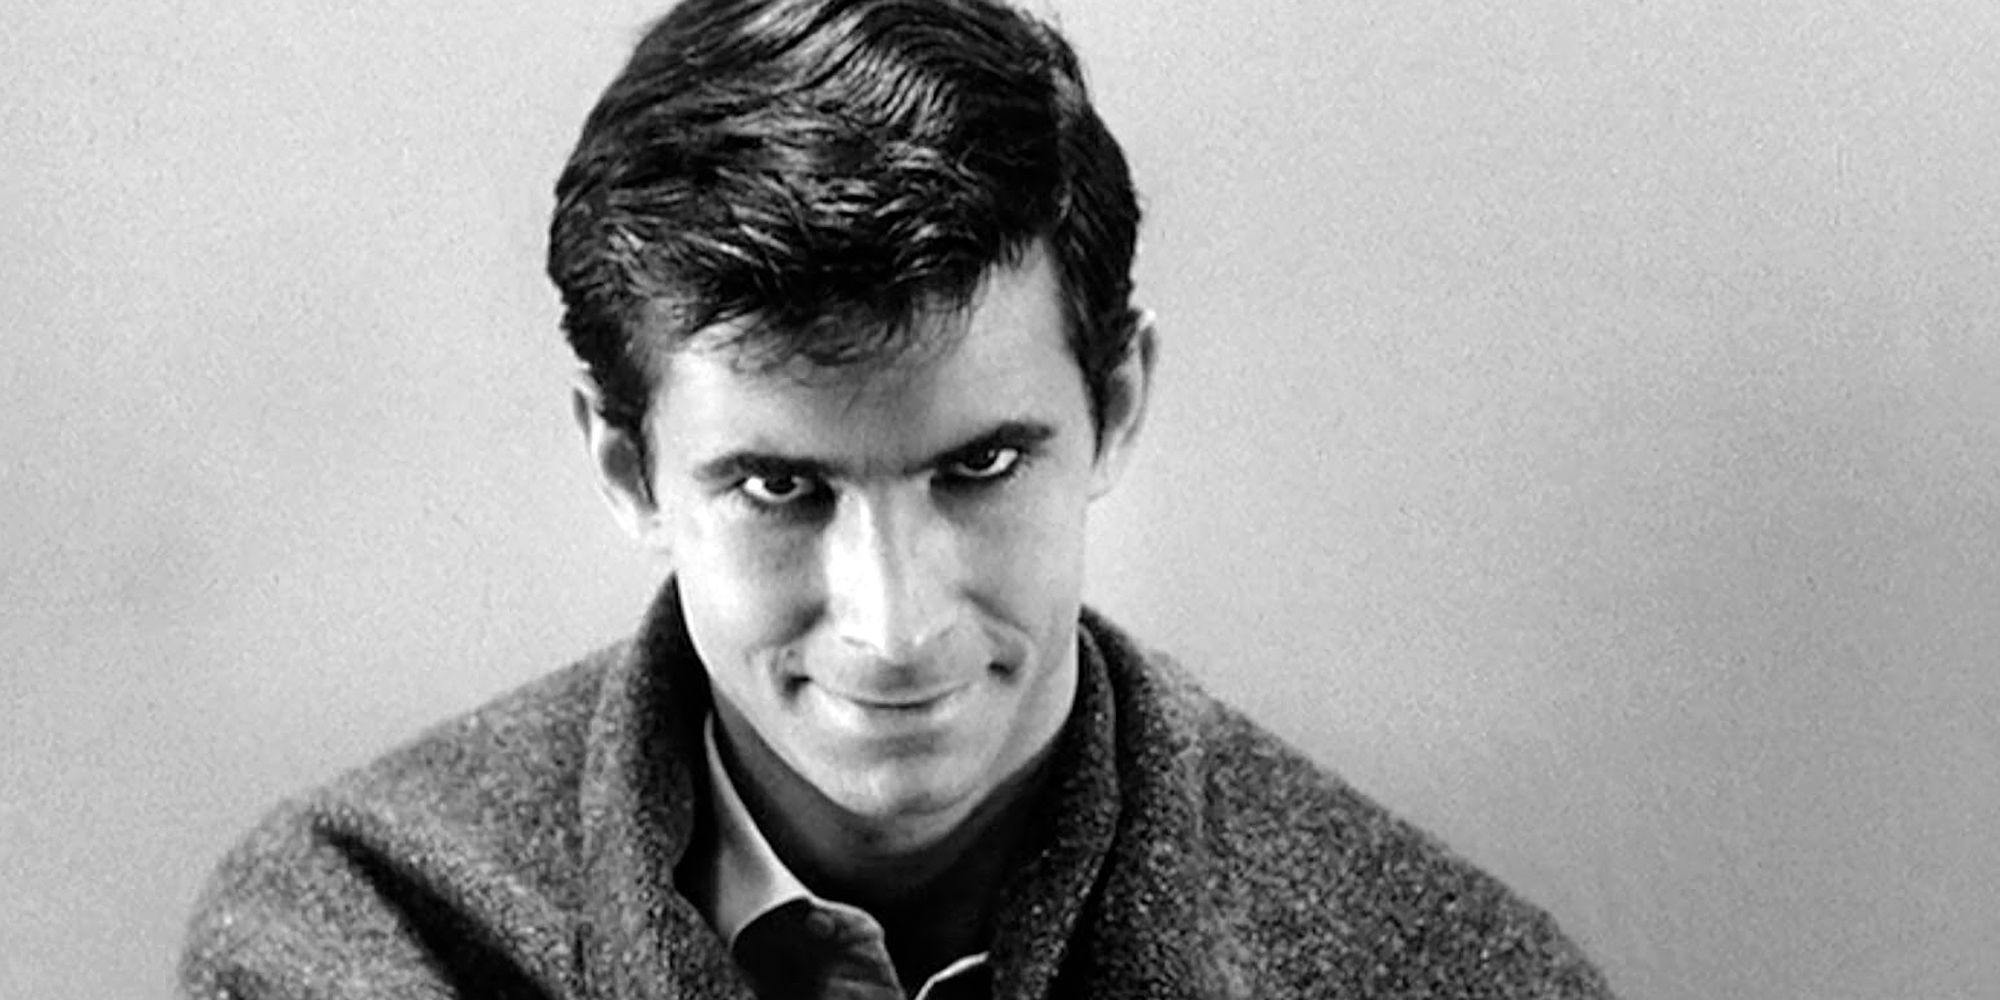 The fourth wall break at the end of 'Psycho' has become iconic